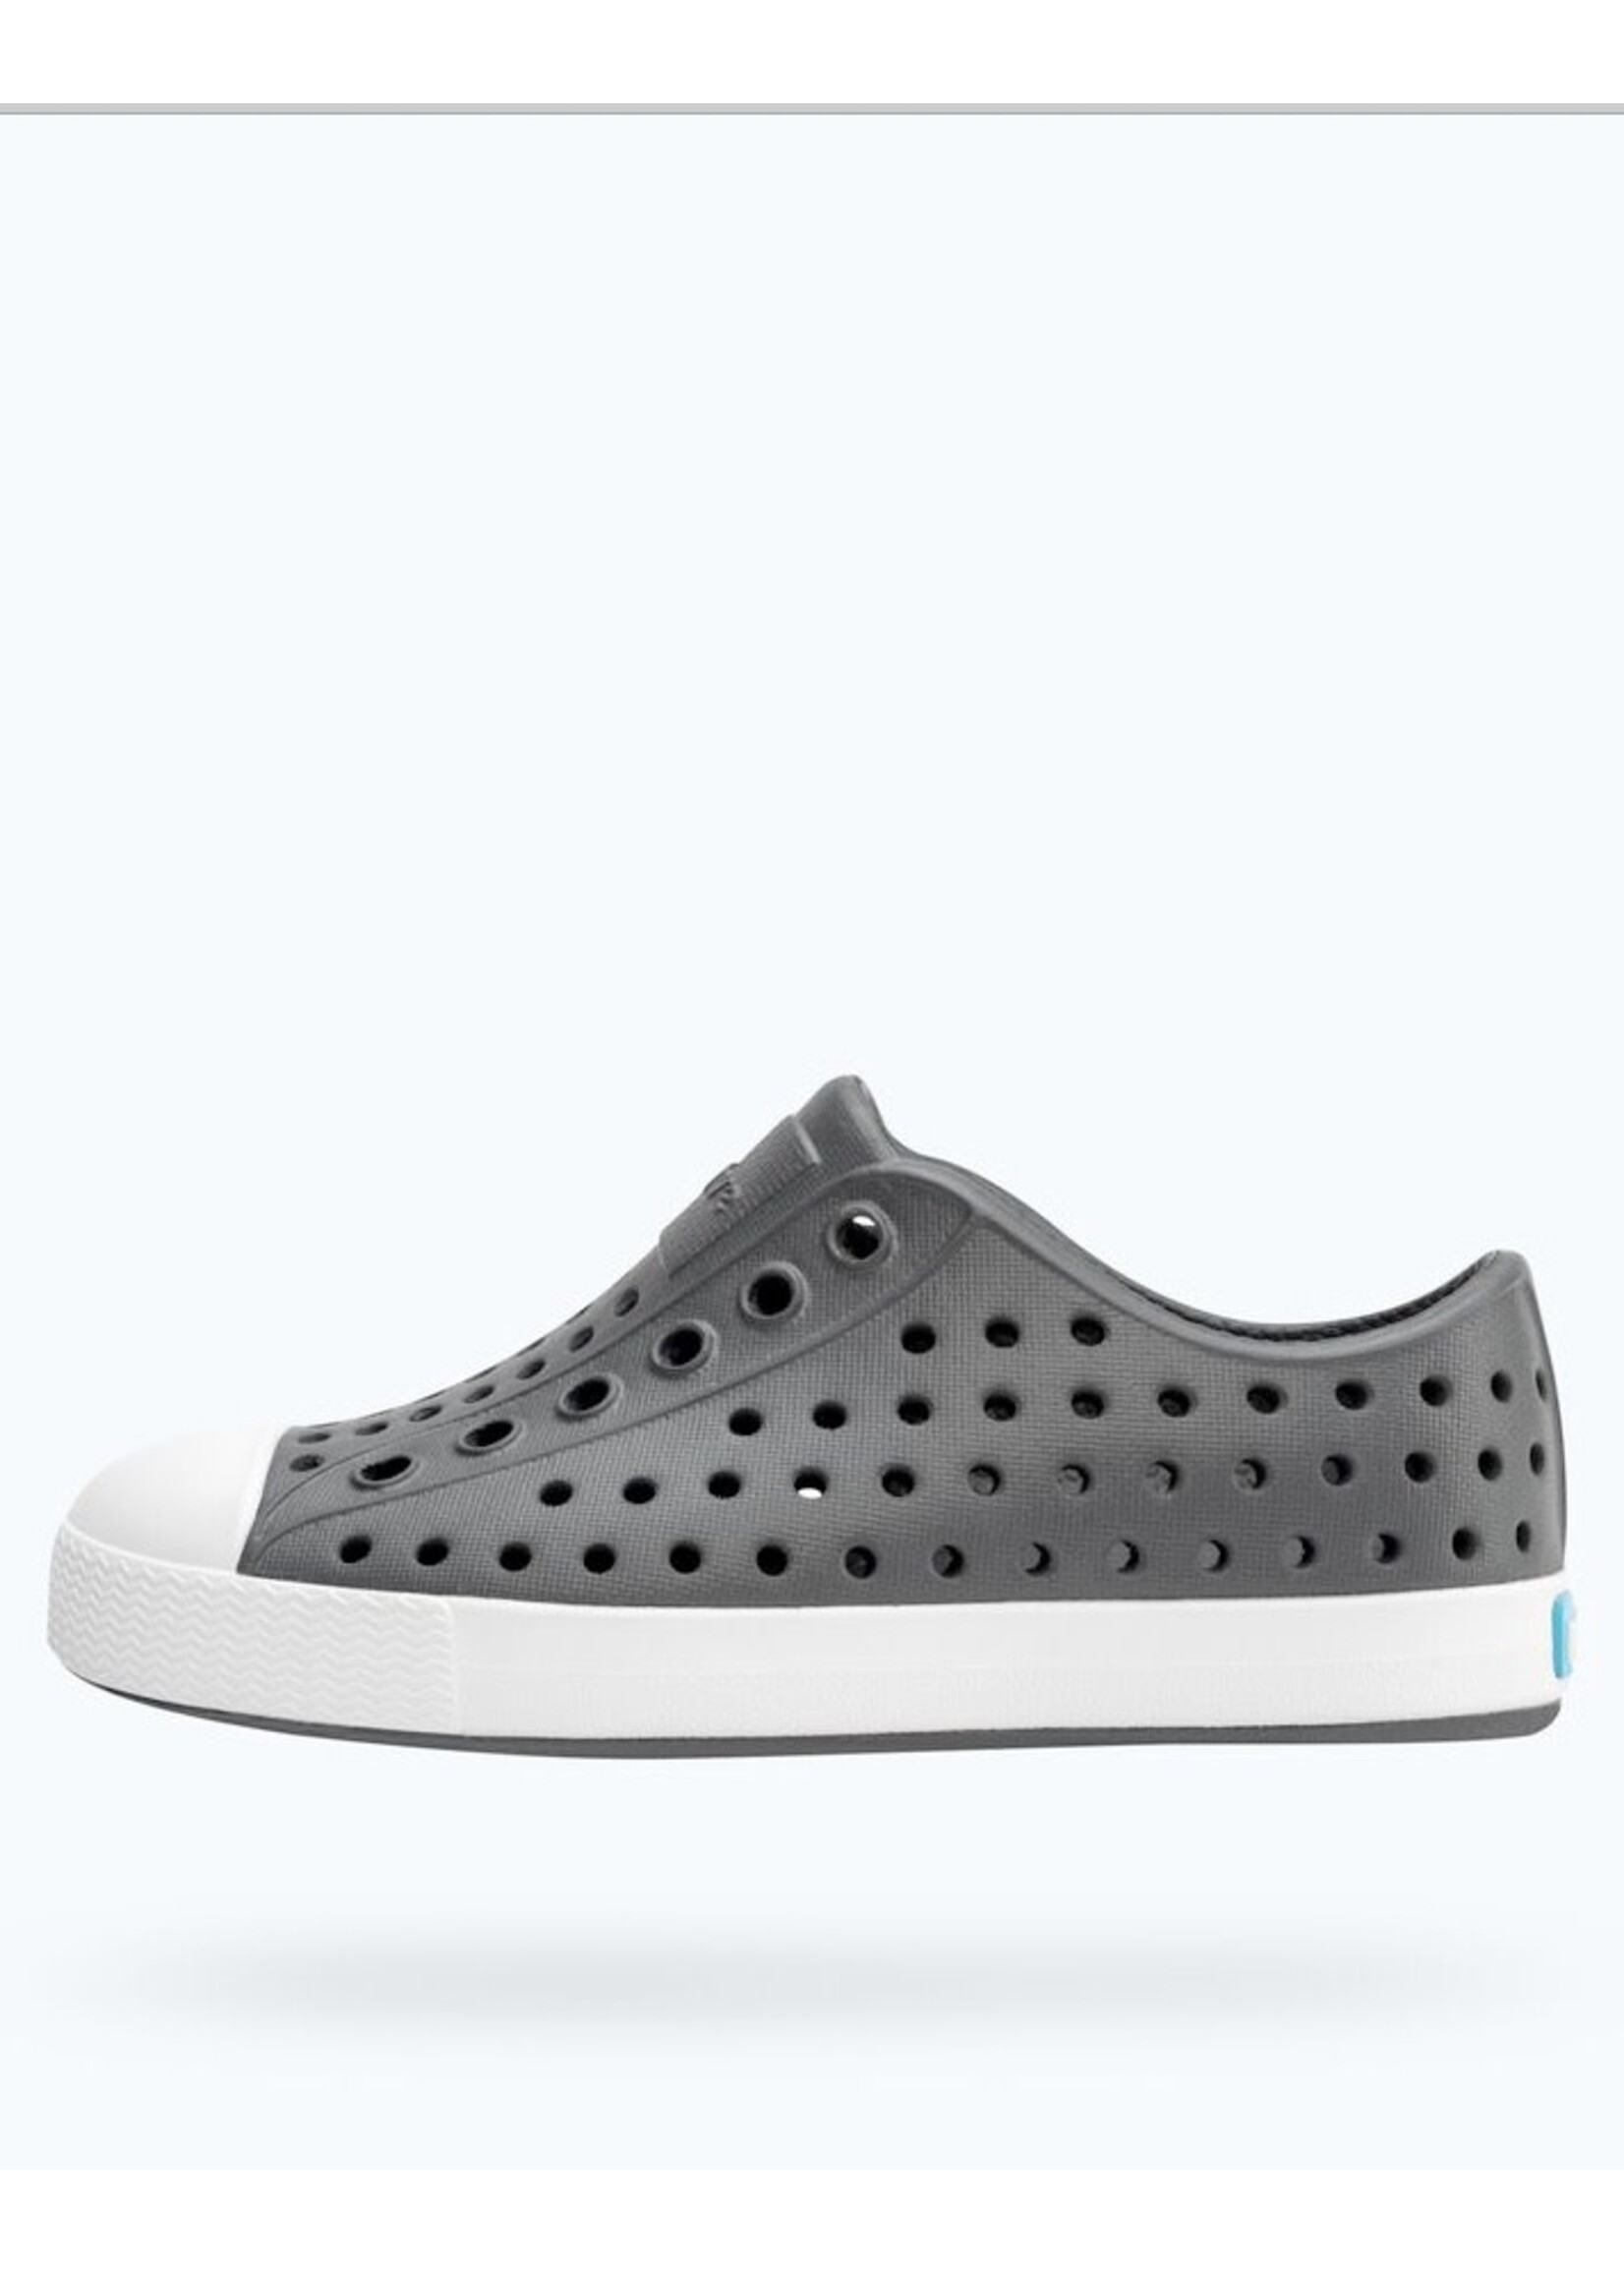 Native Shoes Native Shoes, Jefferson Sugarlite™ Youth / Junior || Gravity Grey/ Shell White